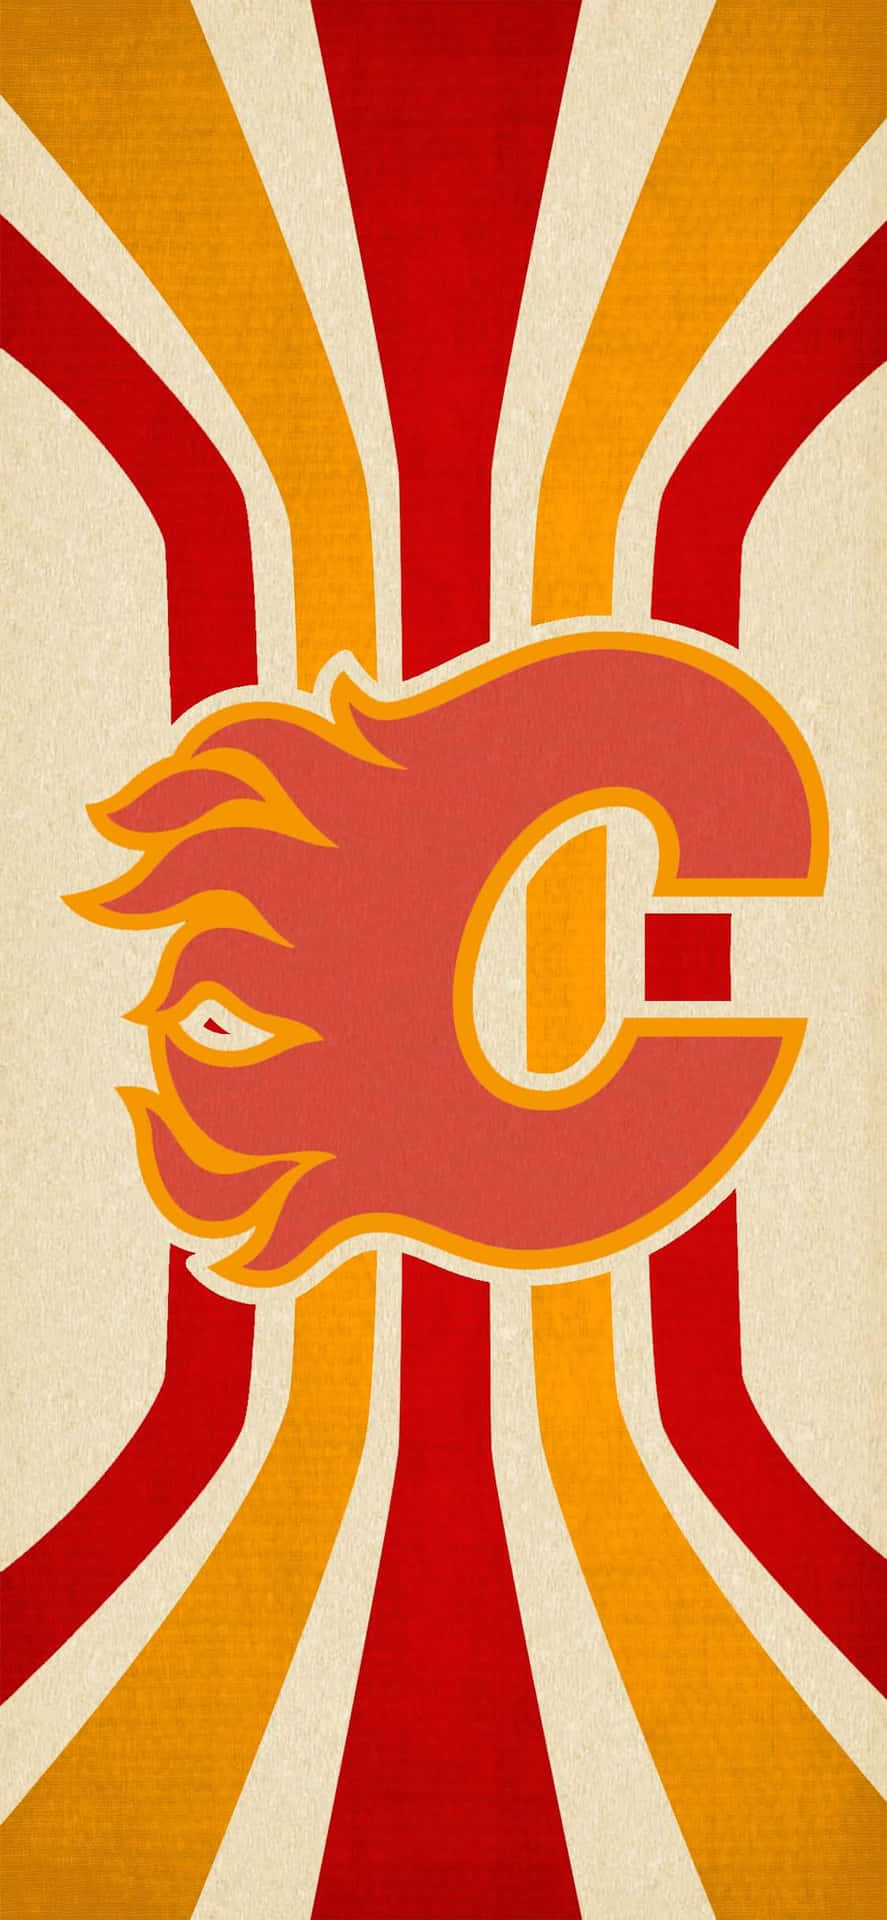 A Poster With The Calgary Flames Logo On It